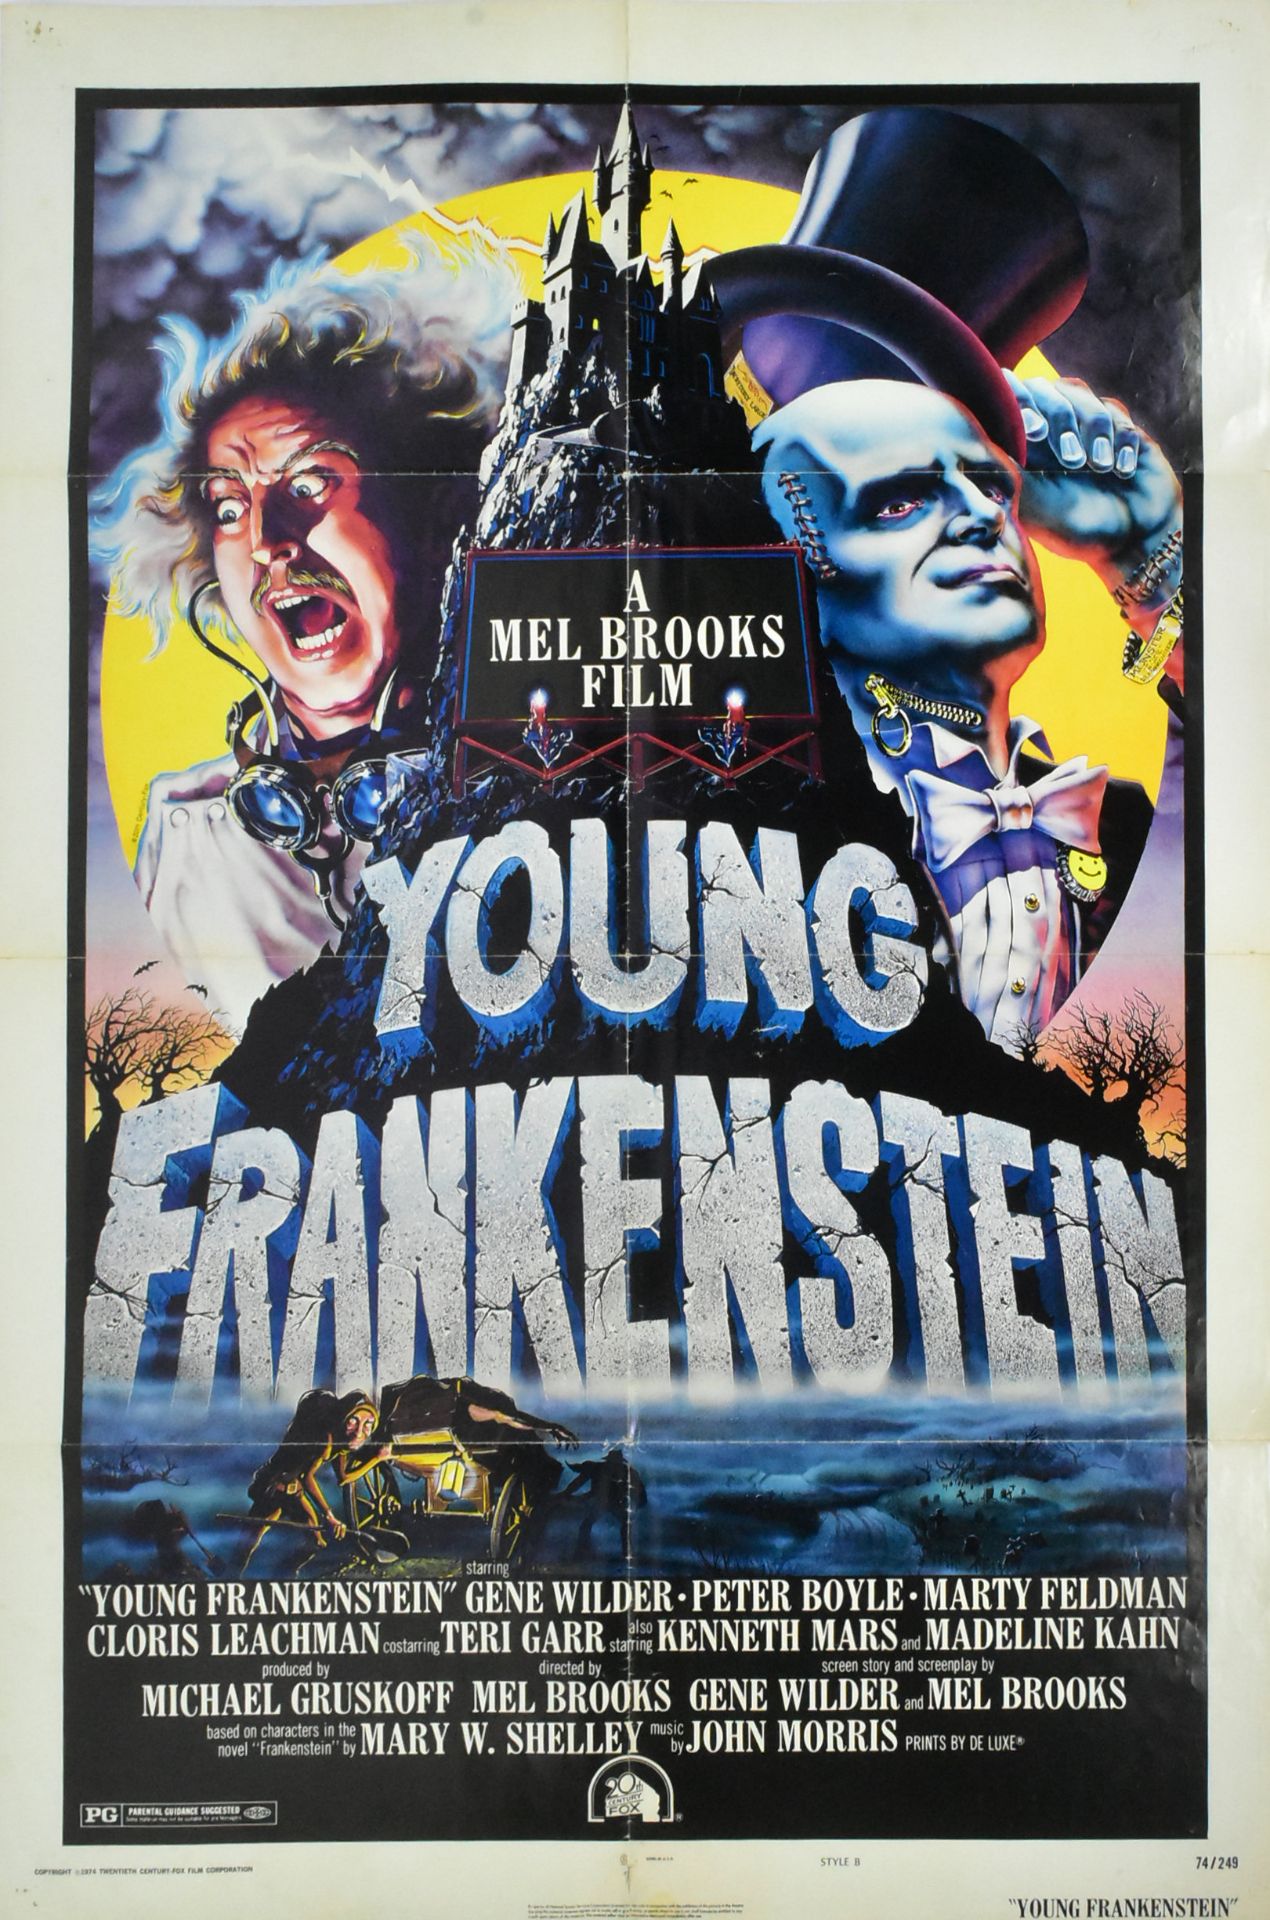 YOUNG FRANKENSTEIN (1974) - US ONE SHEET MOVIE POSTER - Image 2 of 5